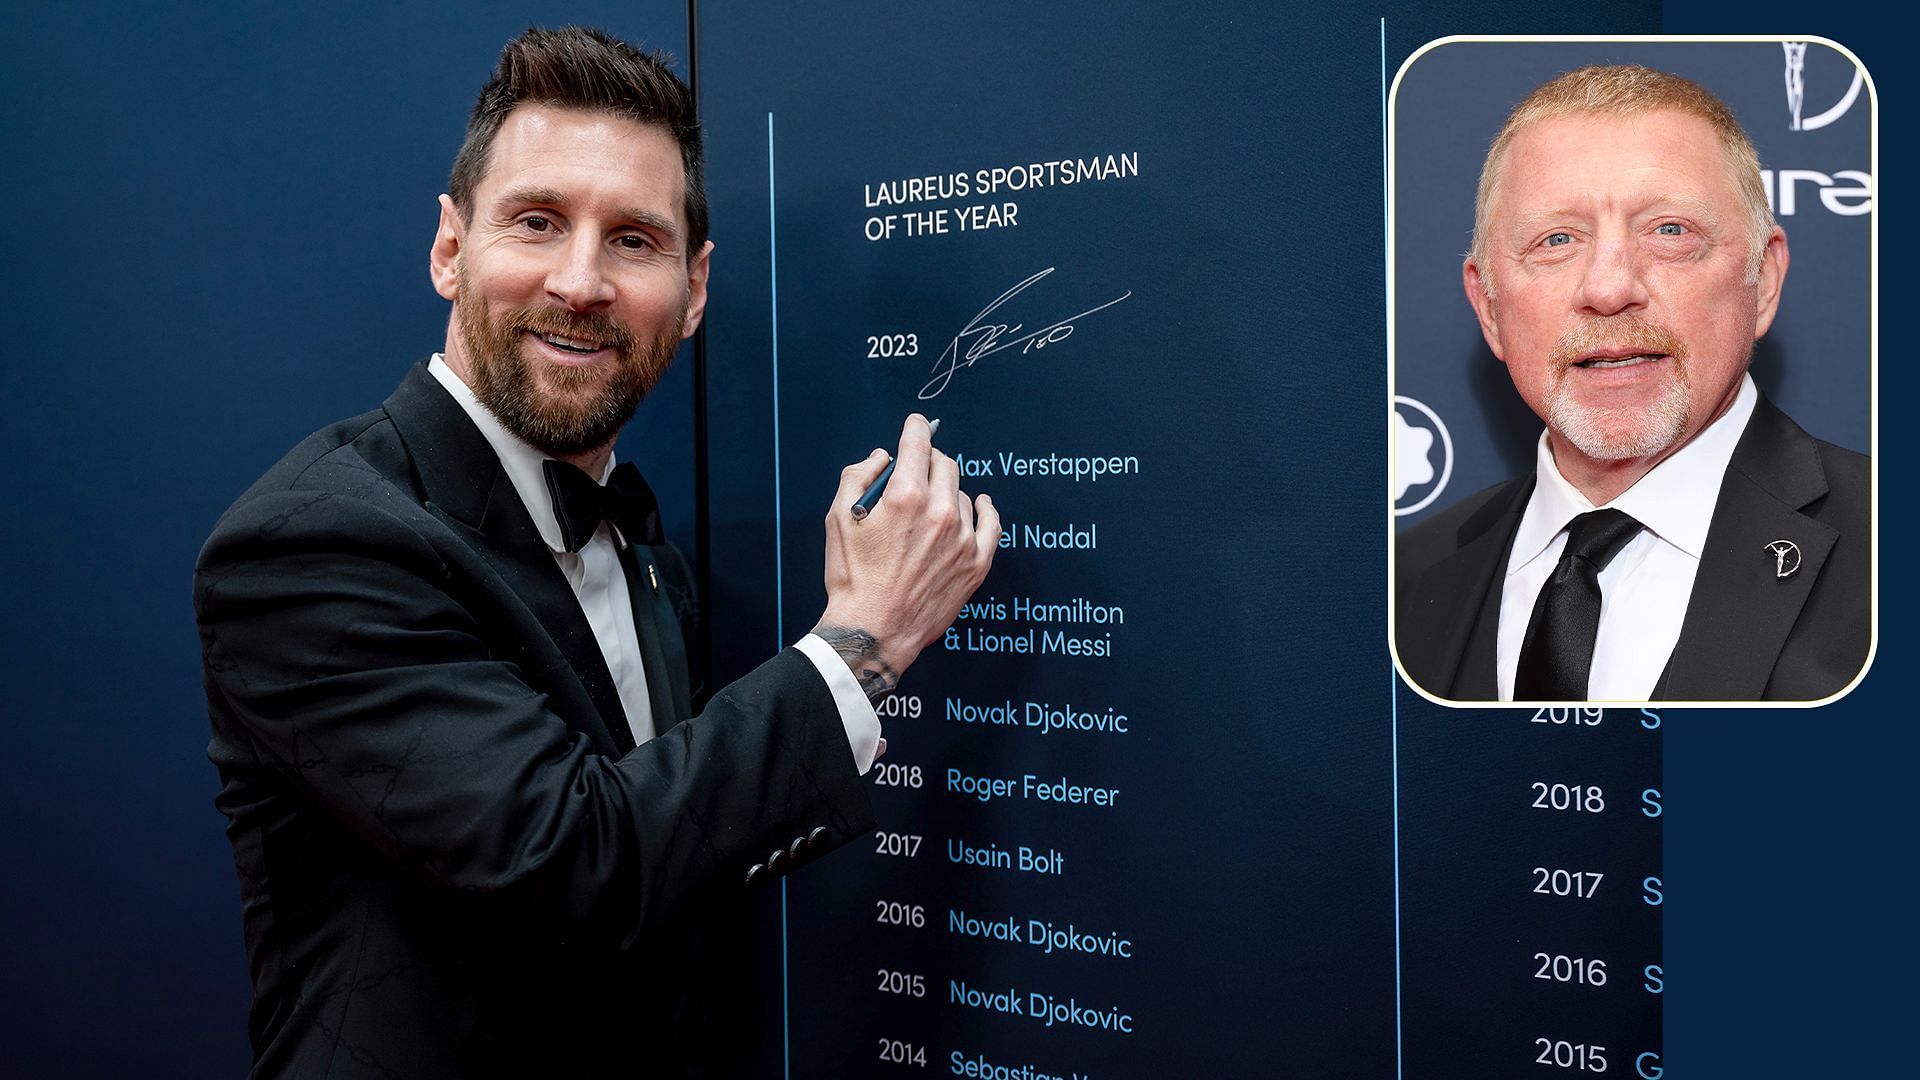 Boris Becker congratulates Lionel Messi on winning Laureus Sportsman of the Year and Team of the Year awards